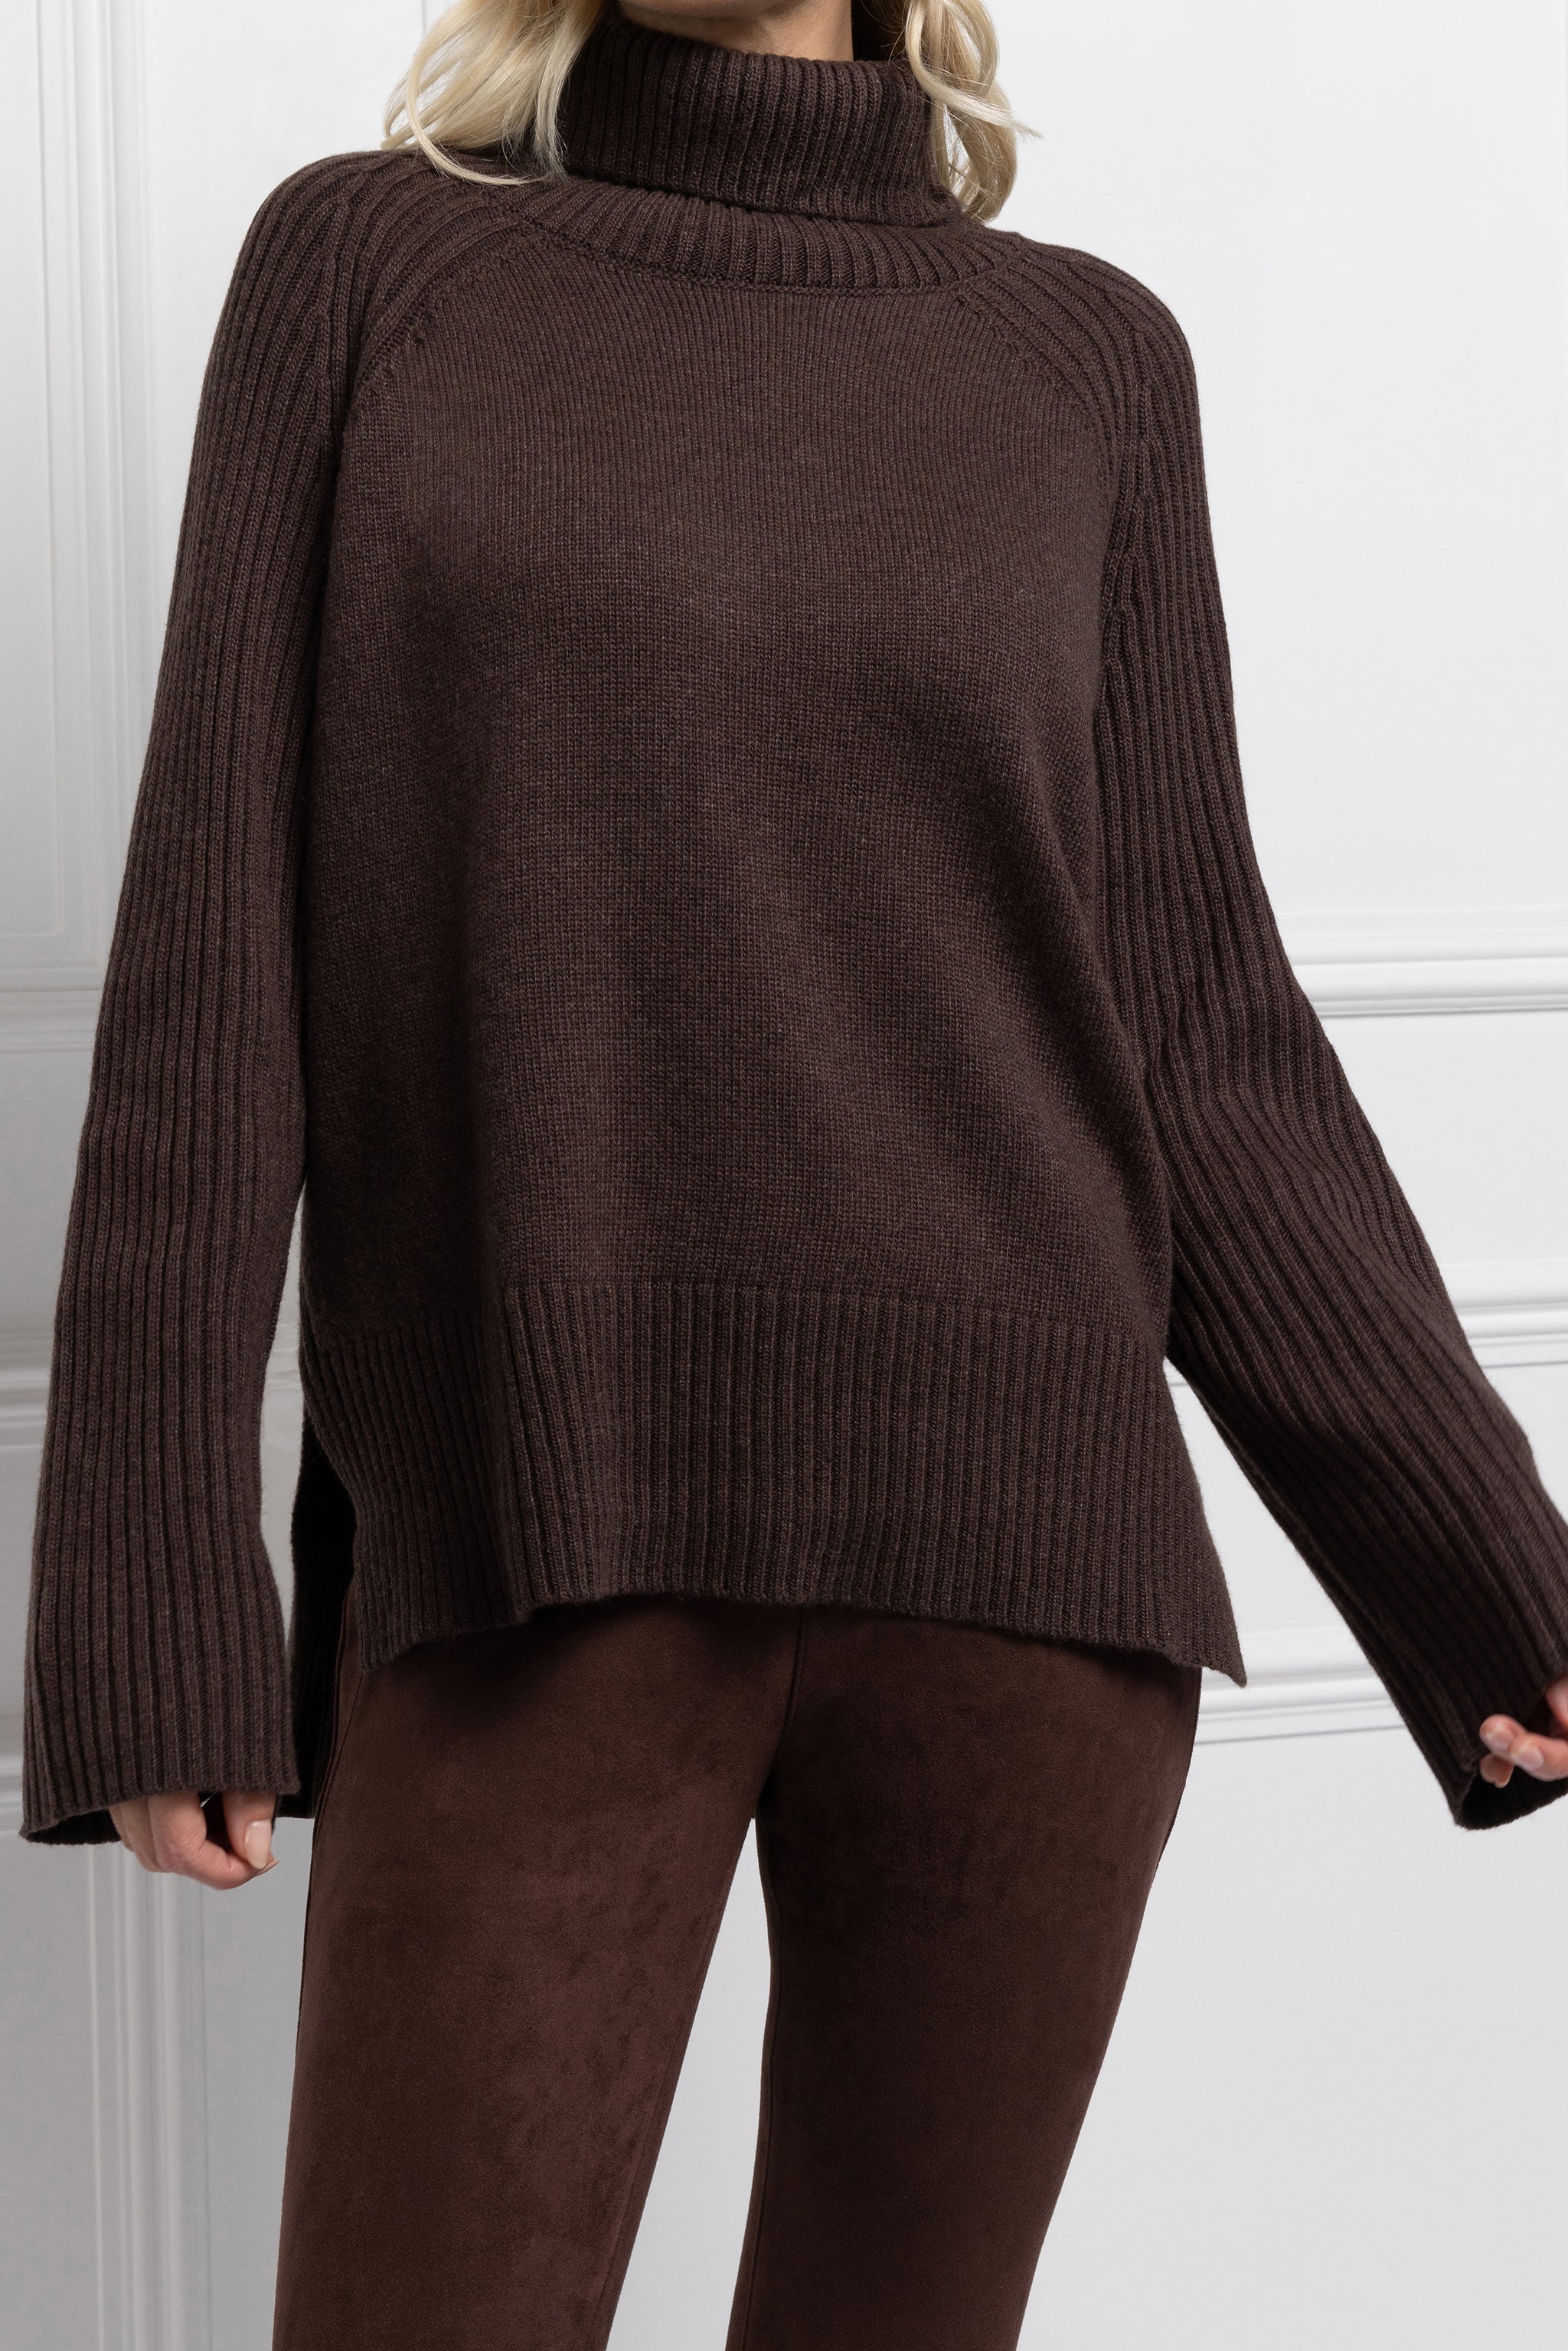 Oversized Cashmere Blend Roll Neck (Chocolate)